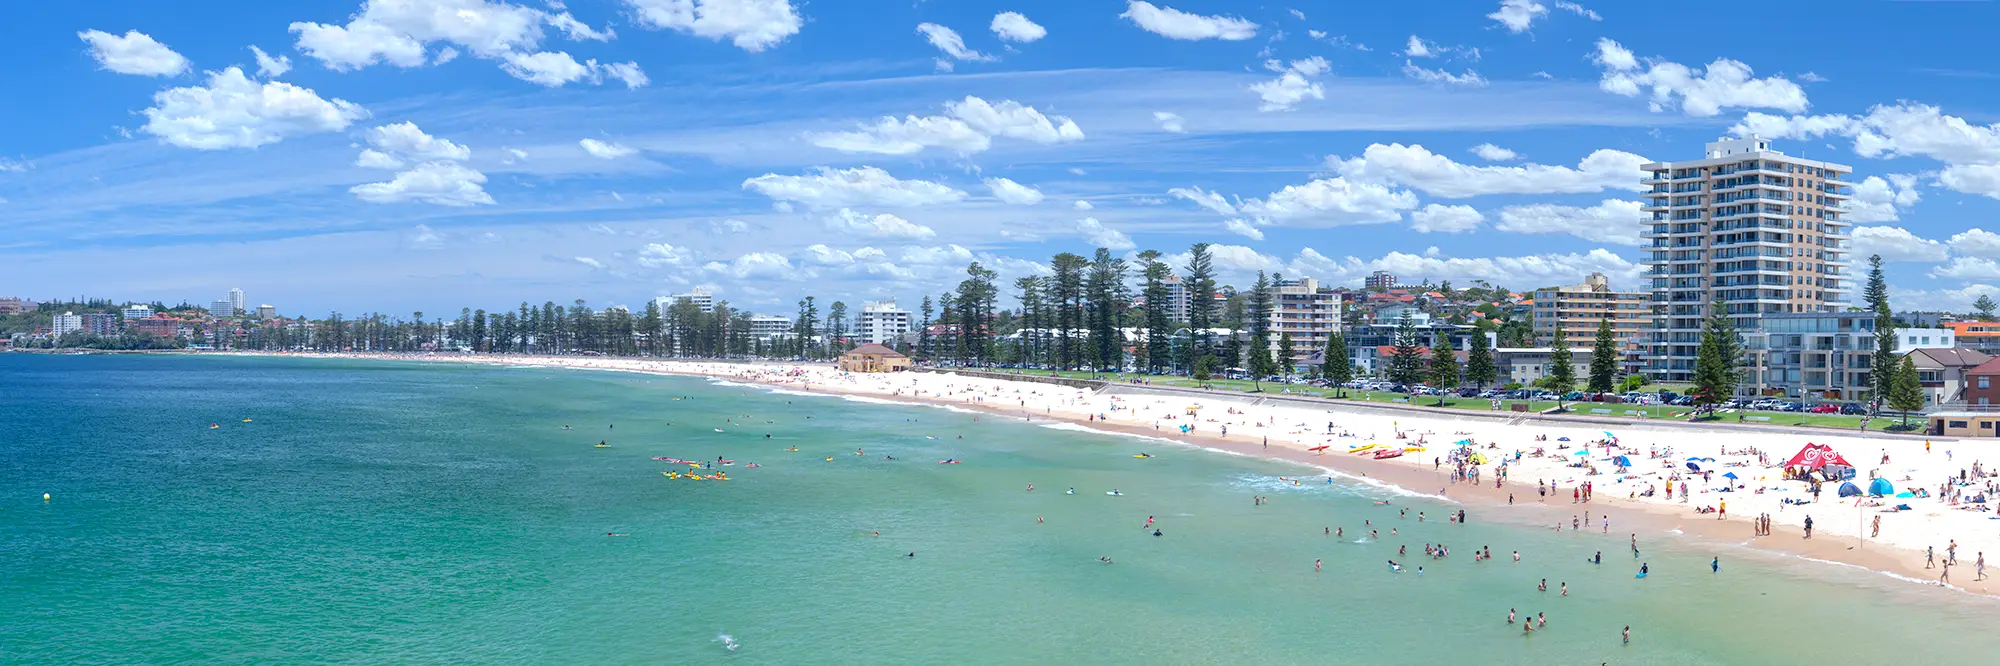 Manly Beach Framed Photographic Art Work -Panoramic Daytime Images